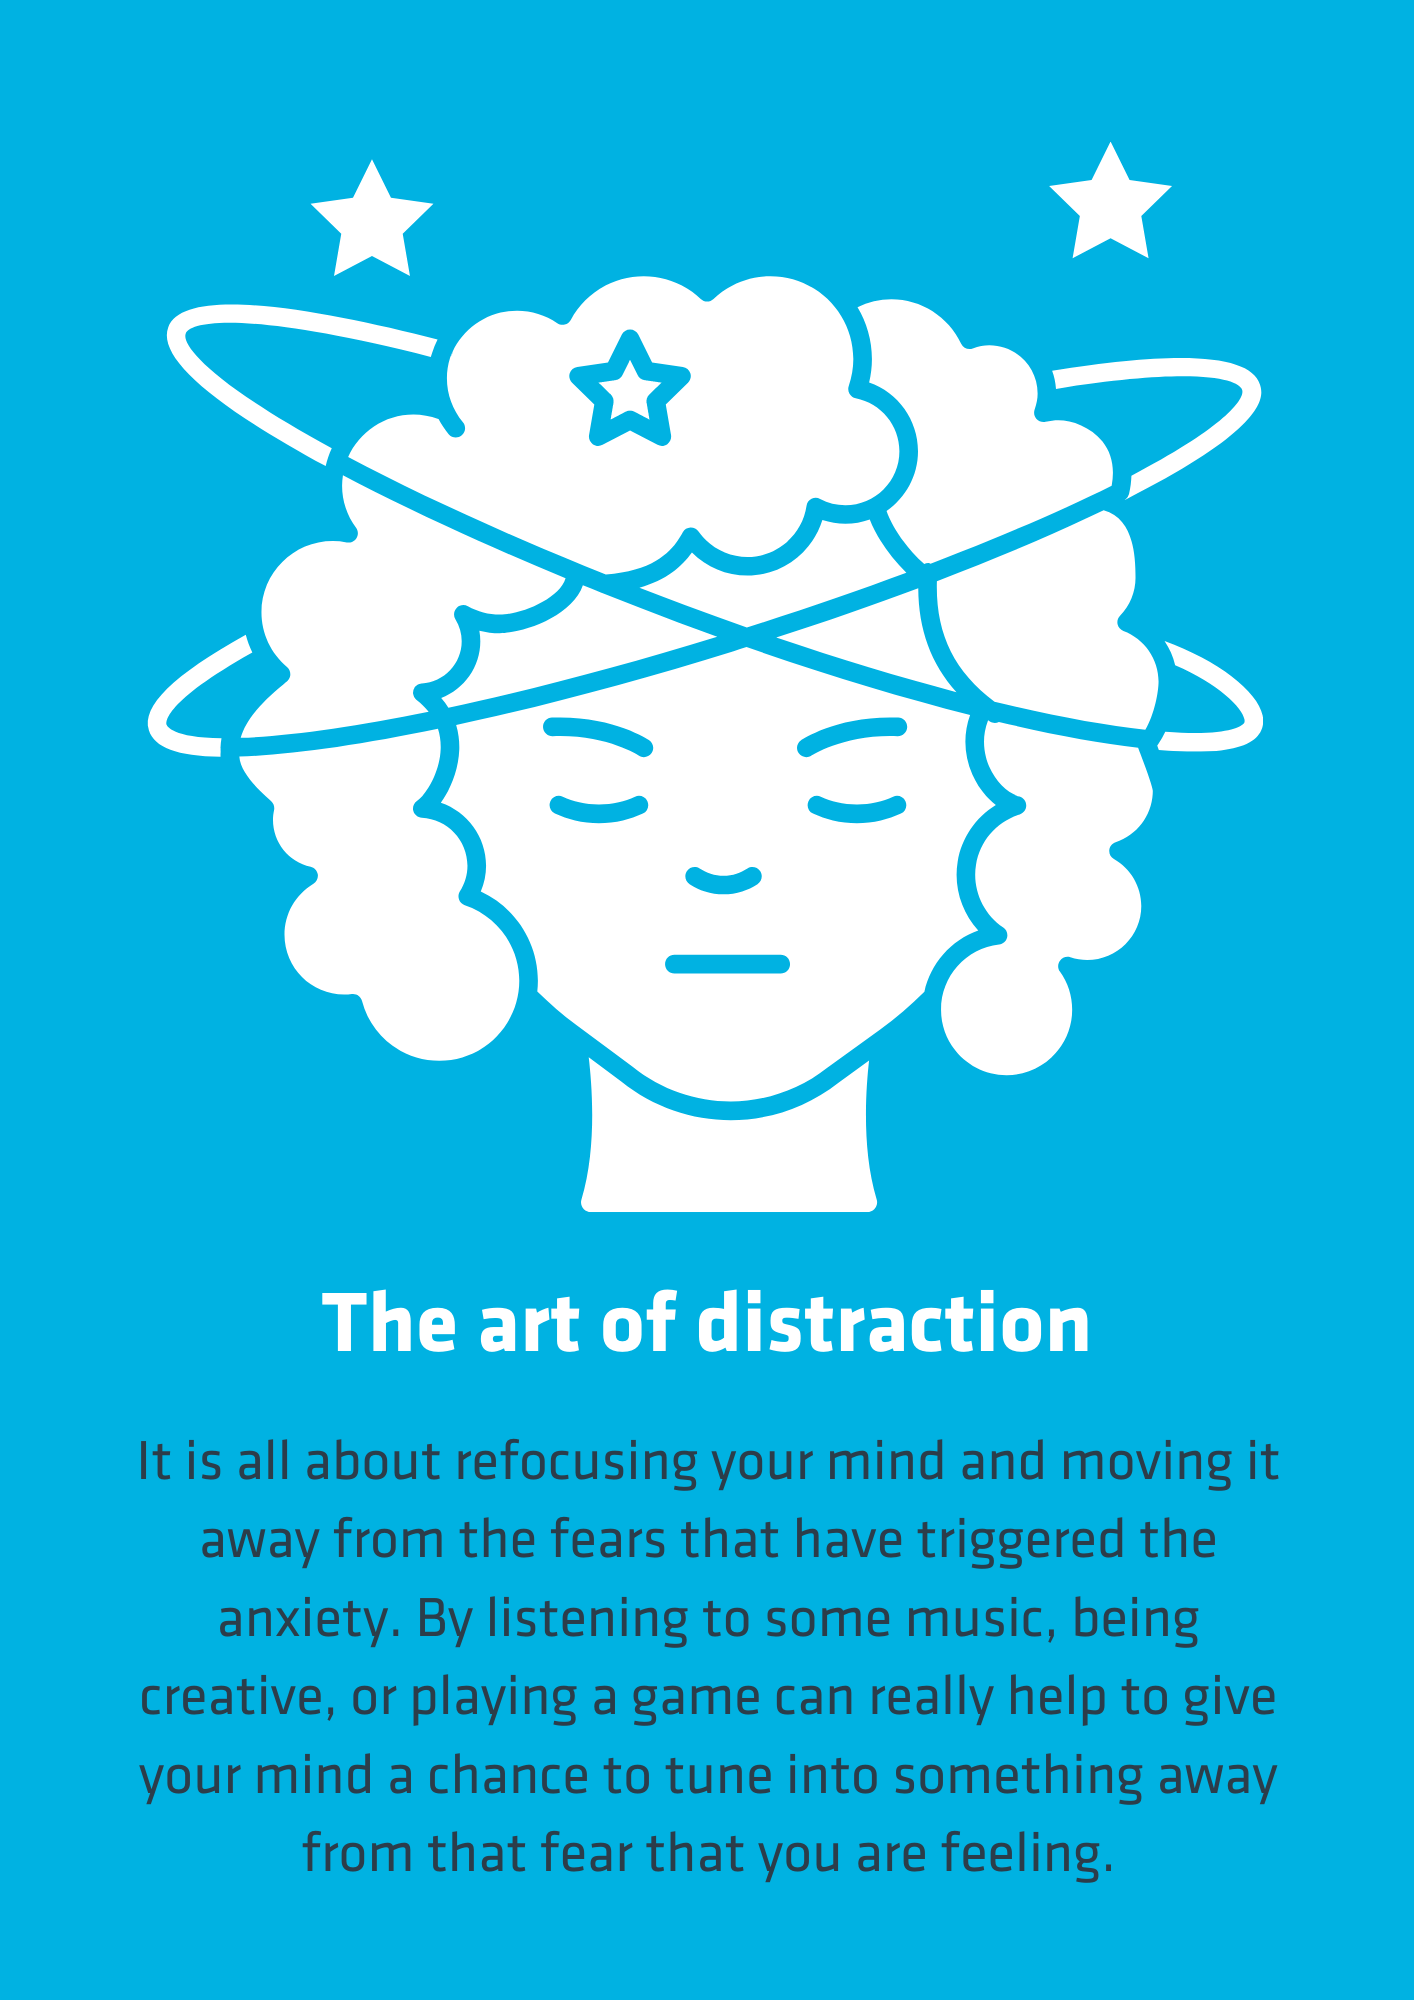 The art of distraction